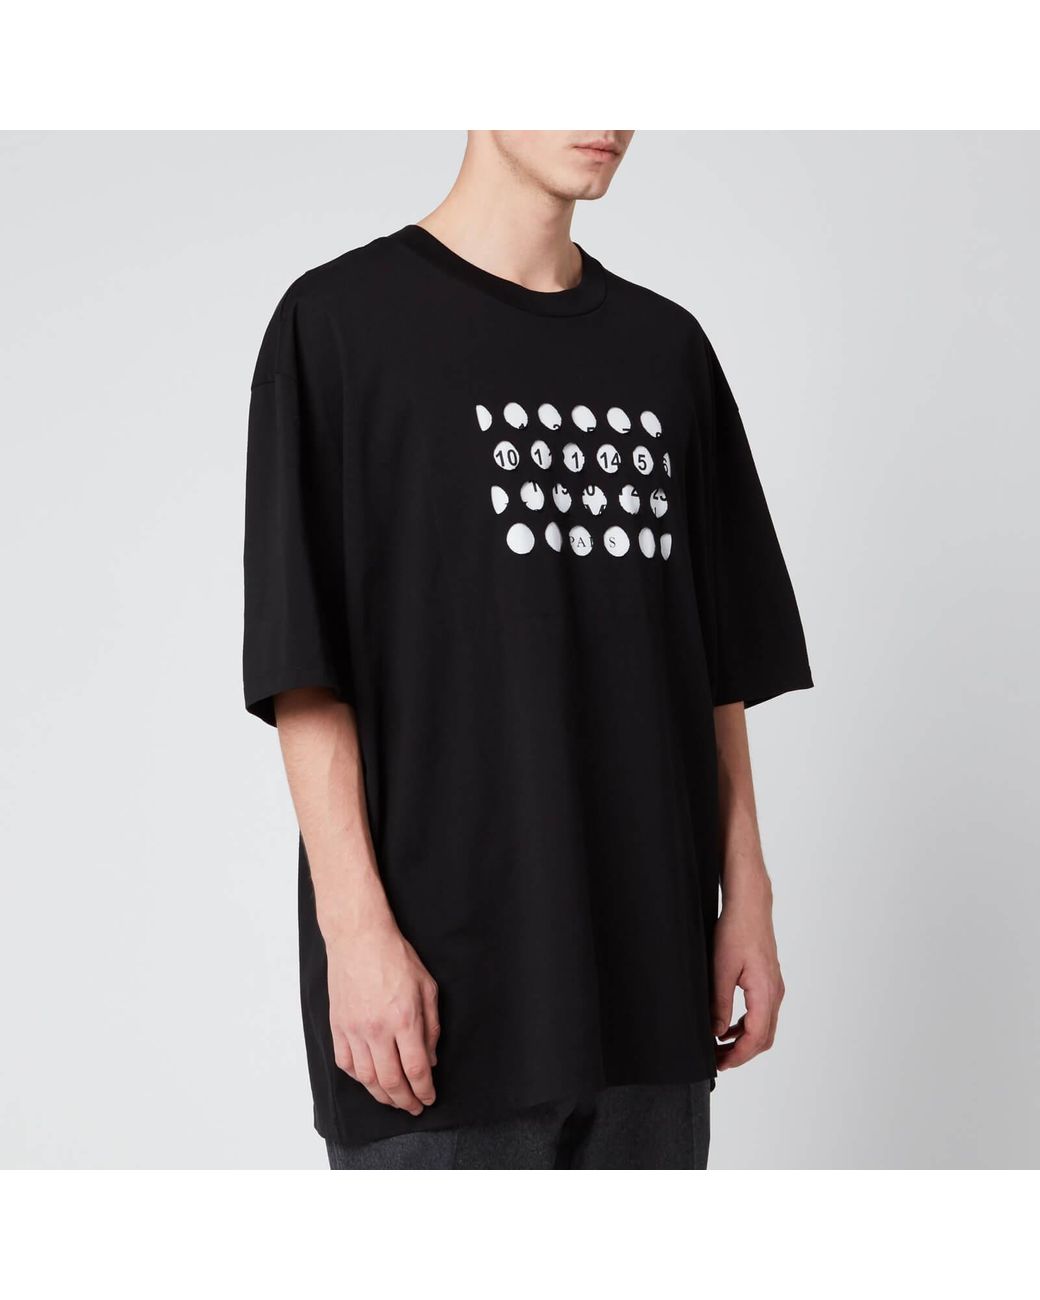 Margiela Oversized Punched Holes T-shirt in Black for Men | Lyst